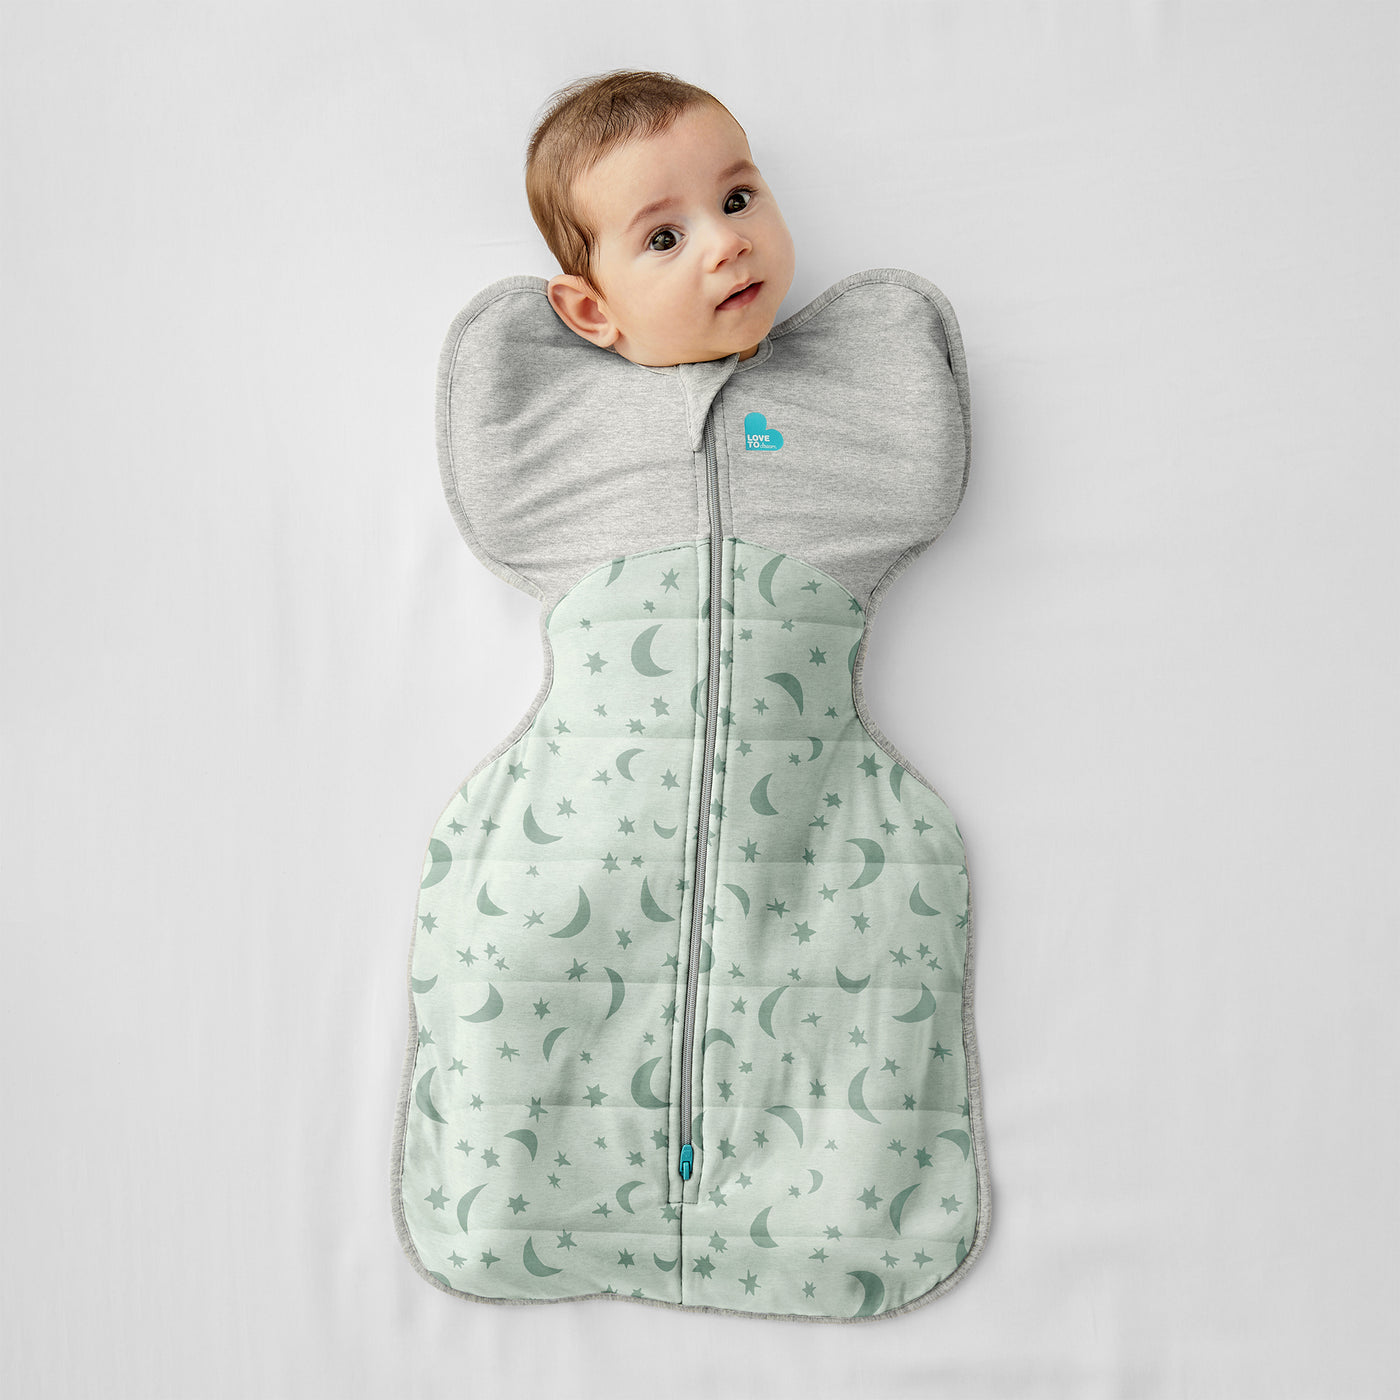 Swaddle Up™ Extra Warm 3.5 TOG - Moonlight Olive - Love to Dream™ NZ 